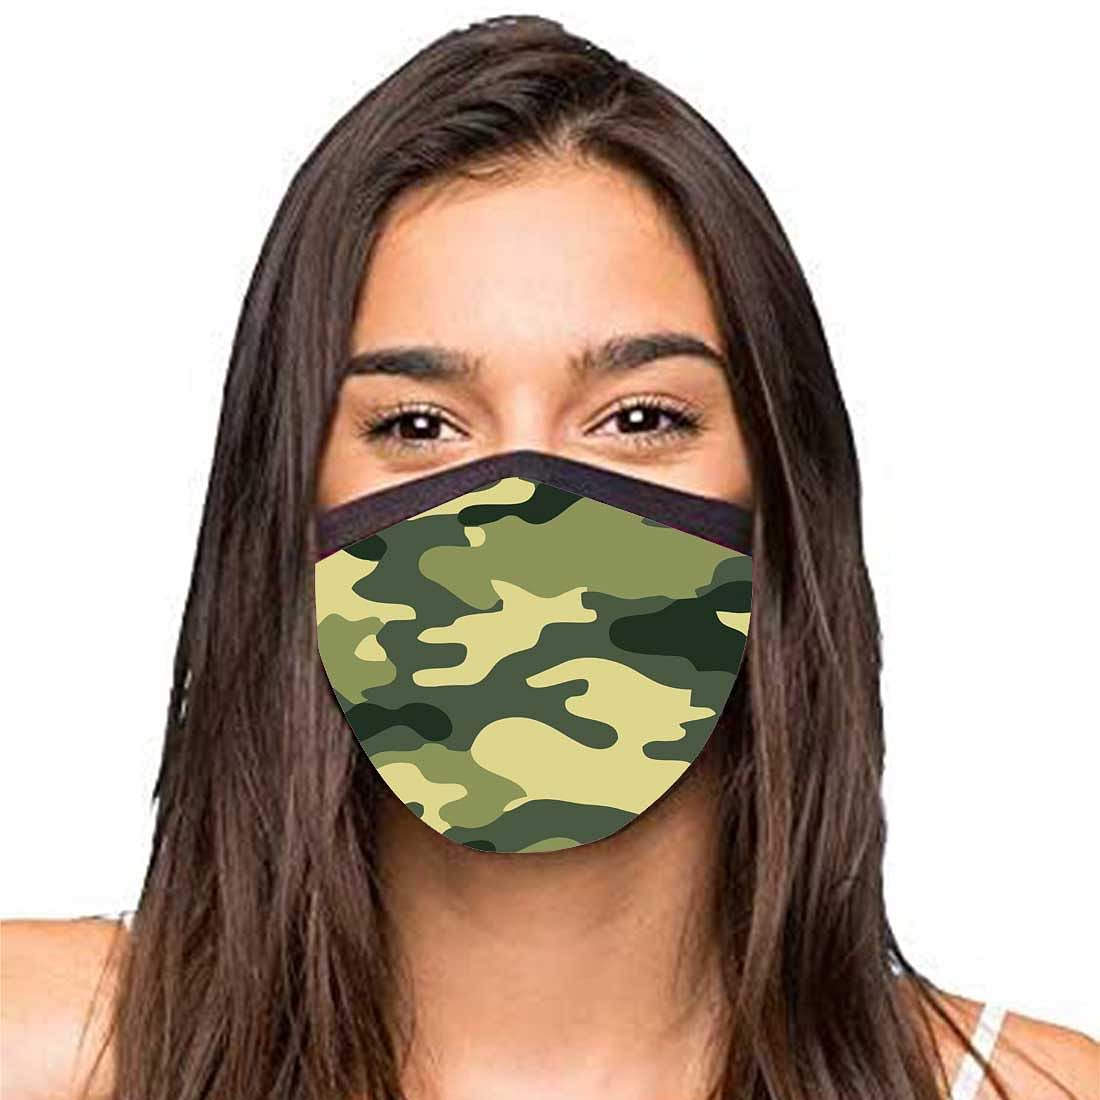 Facemask For Men - 3 Layer Protective Mask - ARMY CAMO MILITARY CAMOUFLAUGE Nutcase